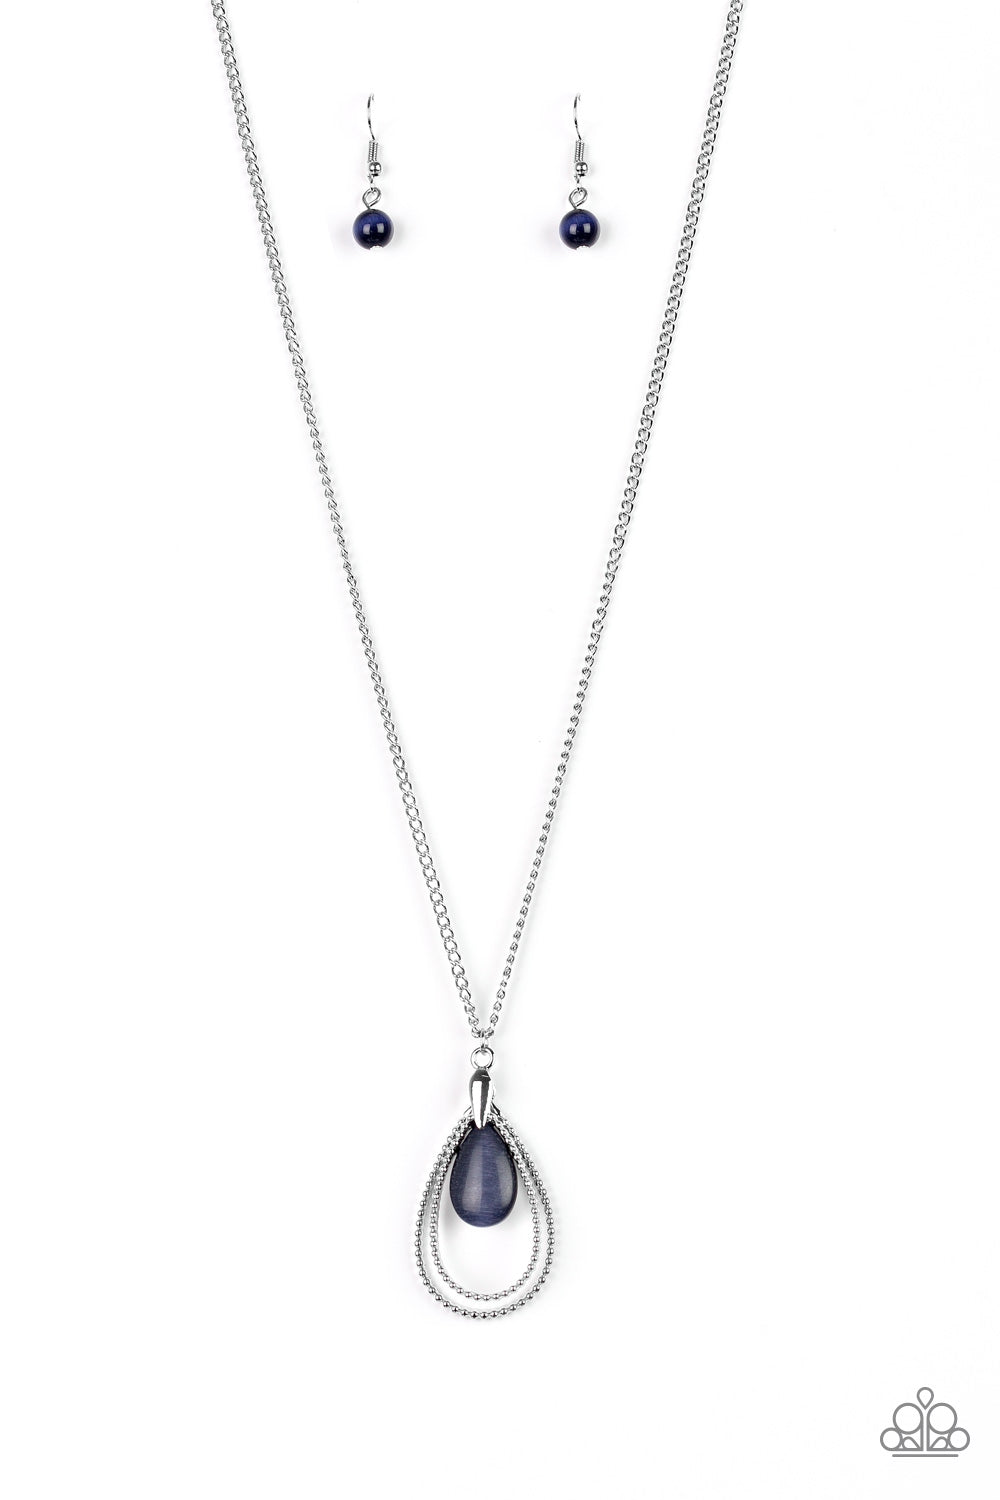 Studded silver teardrops swing from the bottom of a shimmery silver chain. A glowing blue moonstone attaches to the innermost frame, creating a whimsical pendant. Features an adjustable clasp closure.